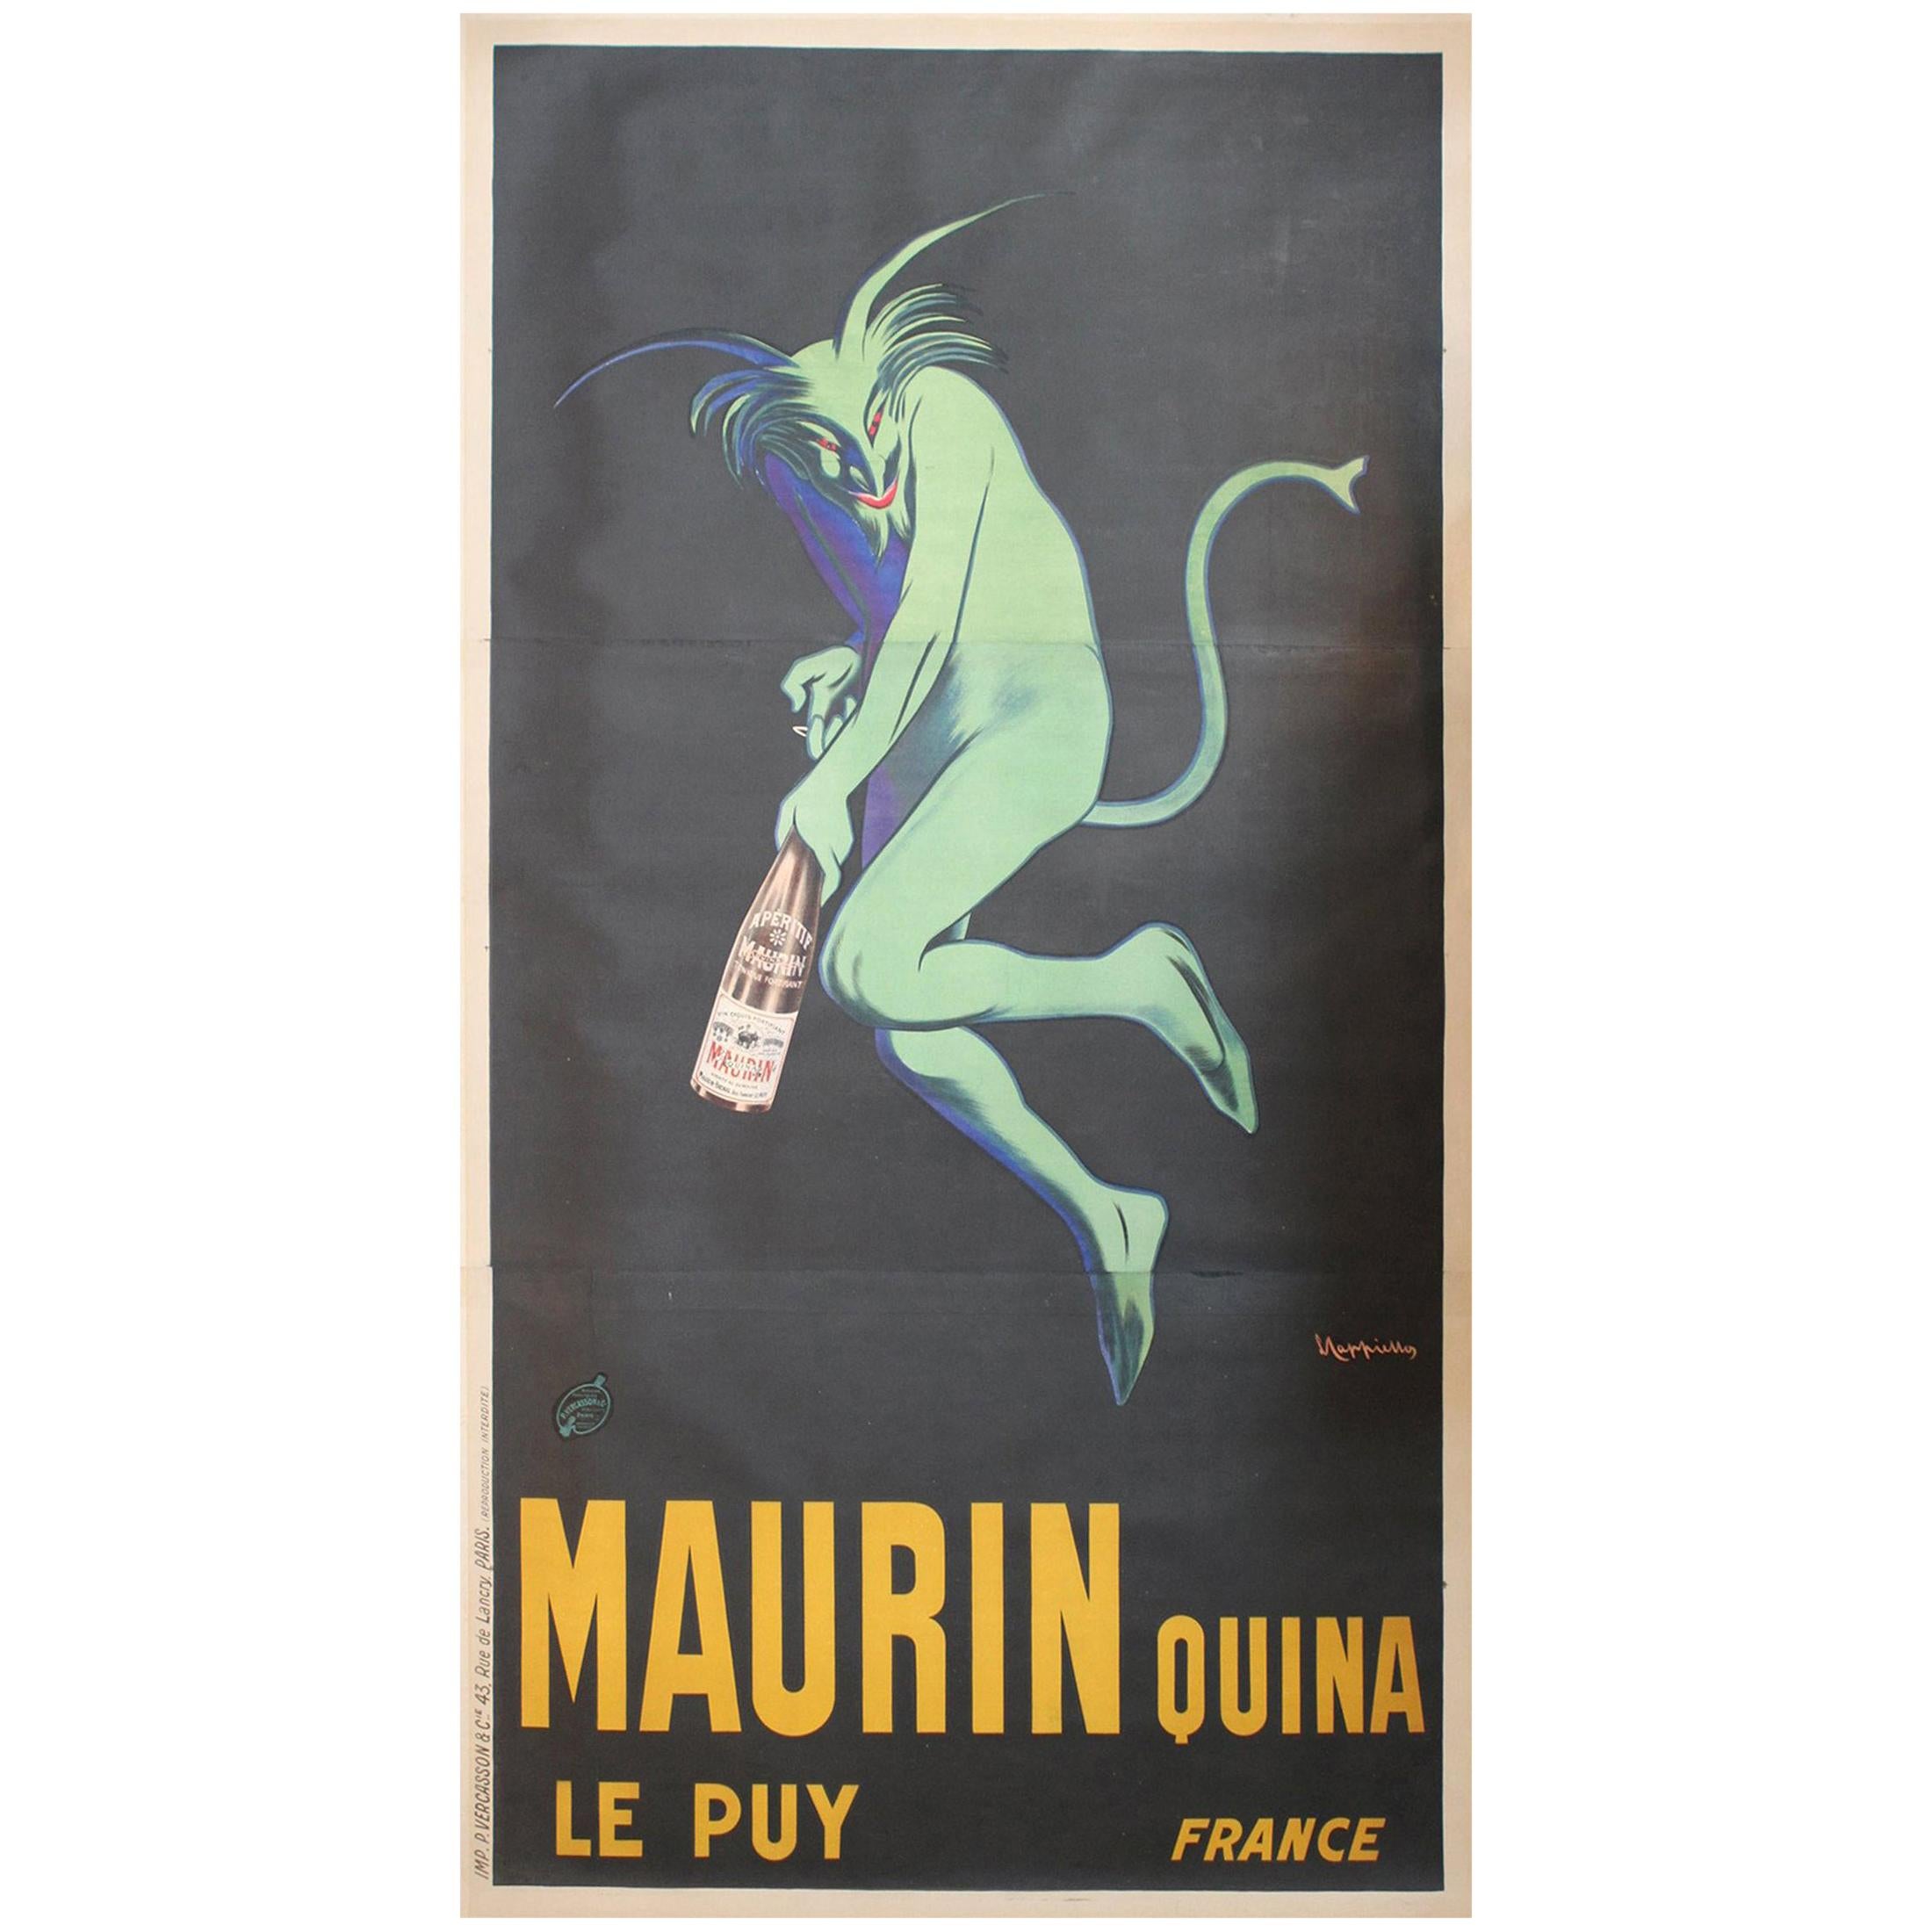 Monumental Original French Poster Maurin Quina Ley Puy, Great for Winery/ Bar For Sale